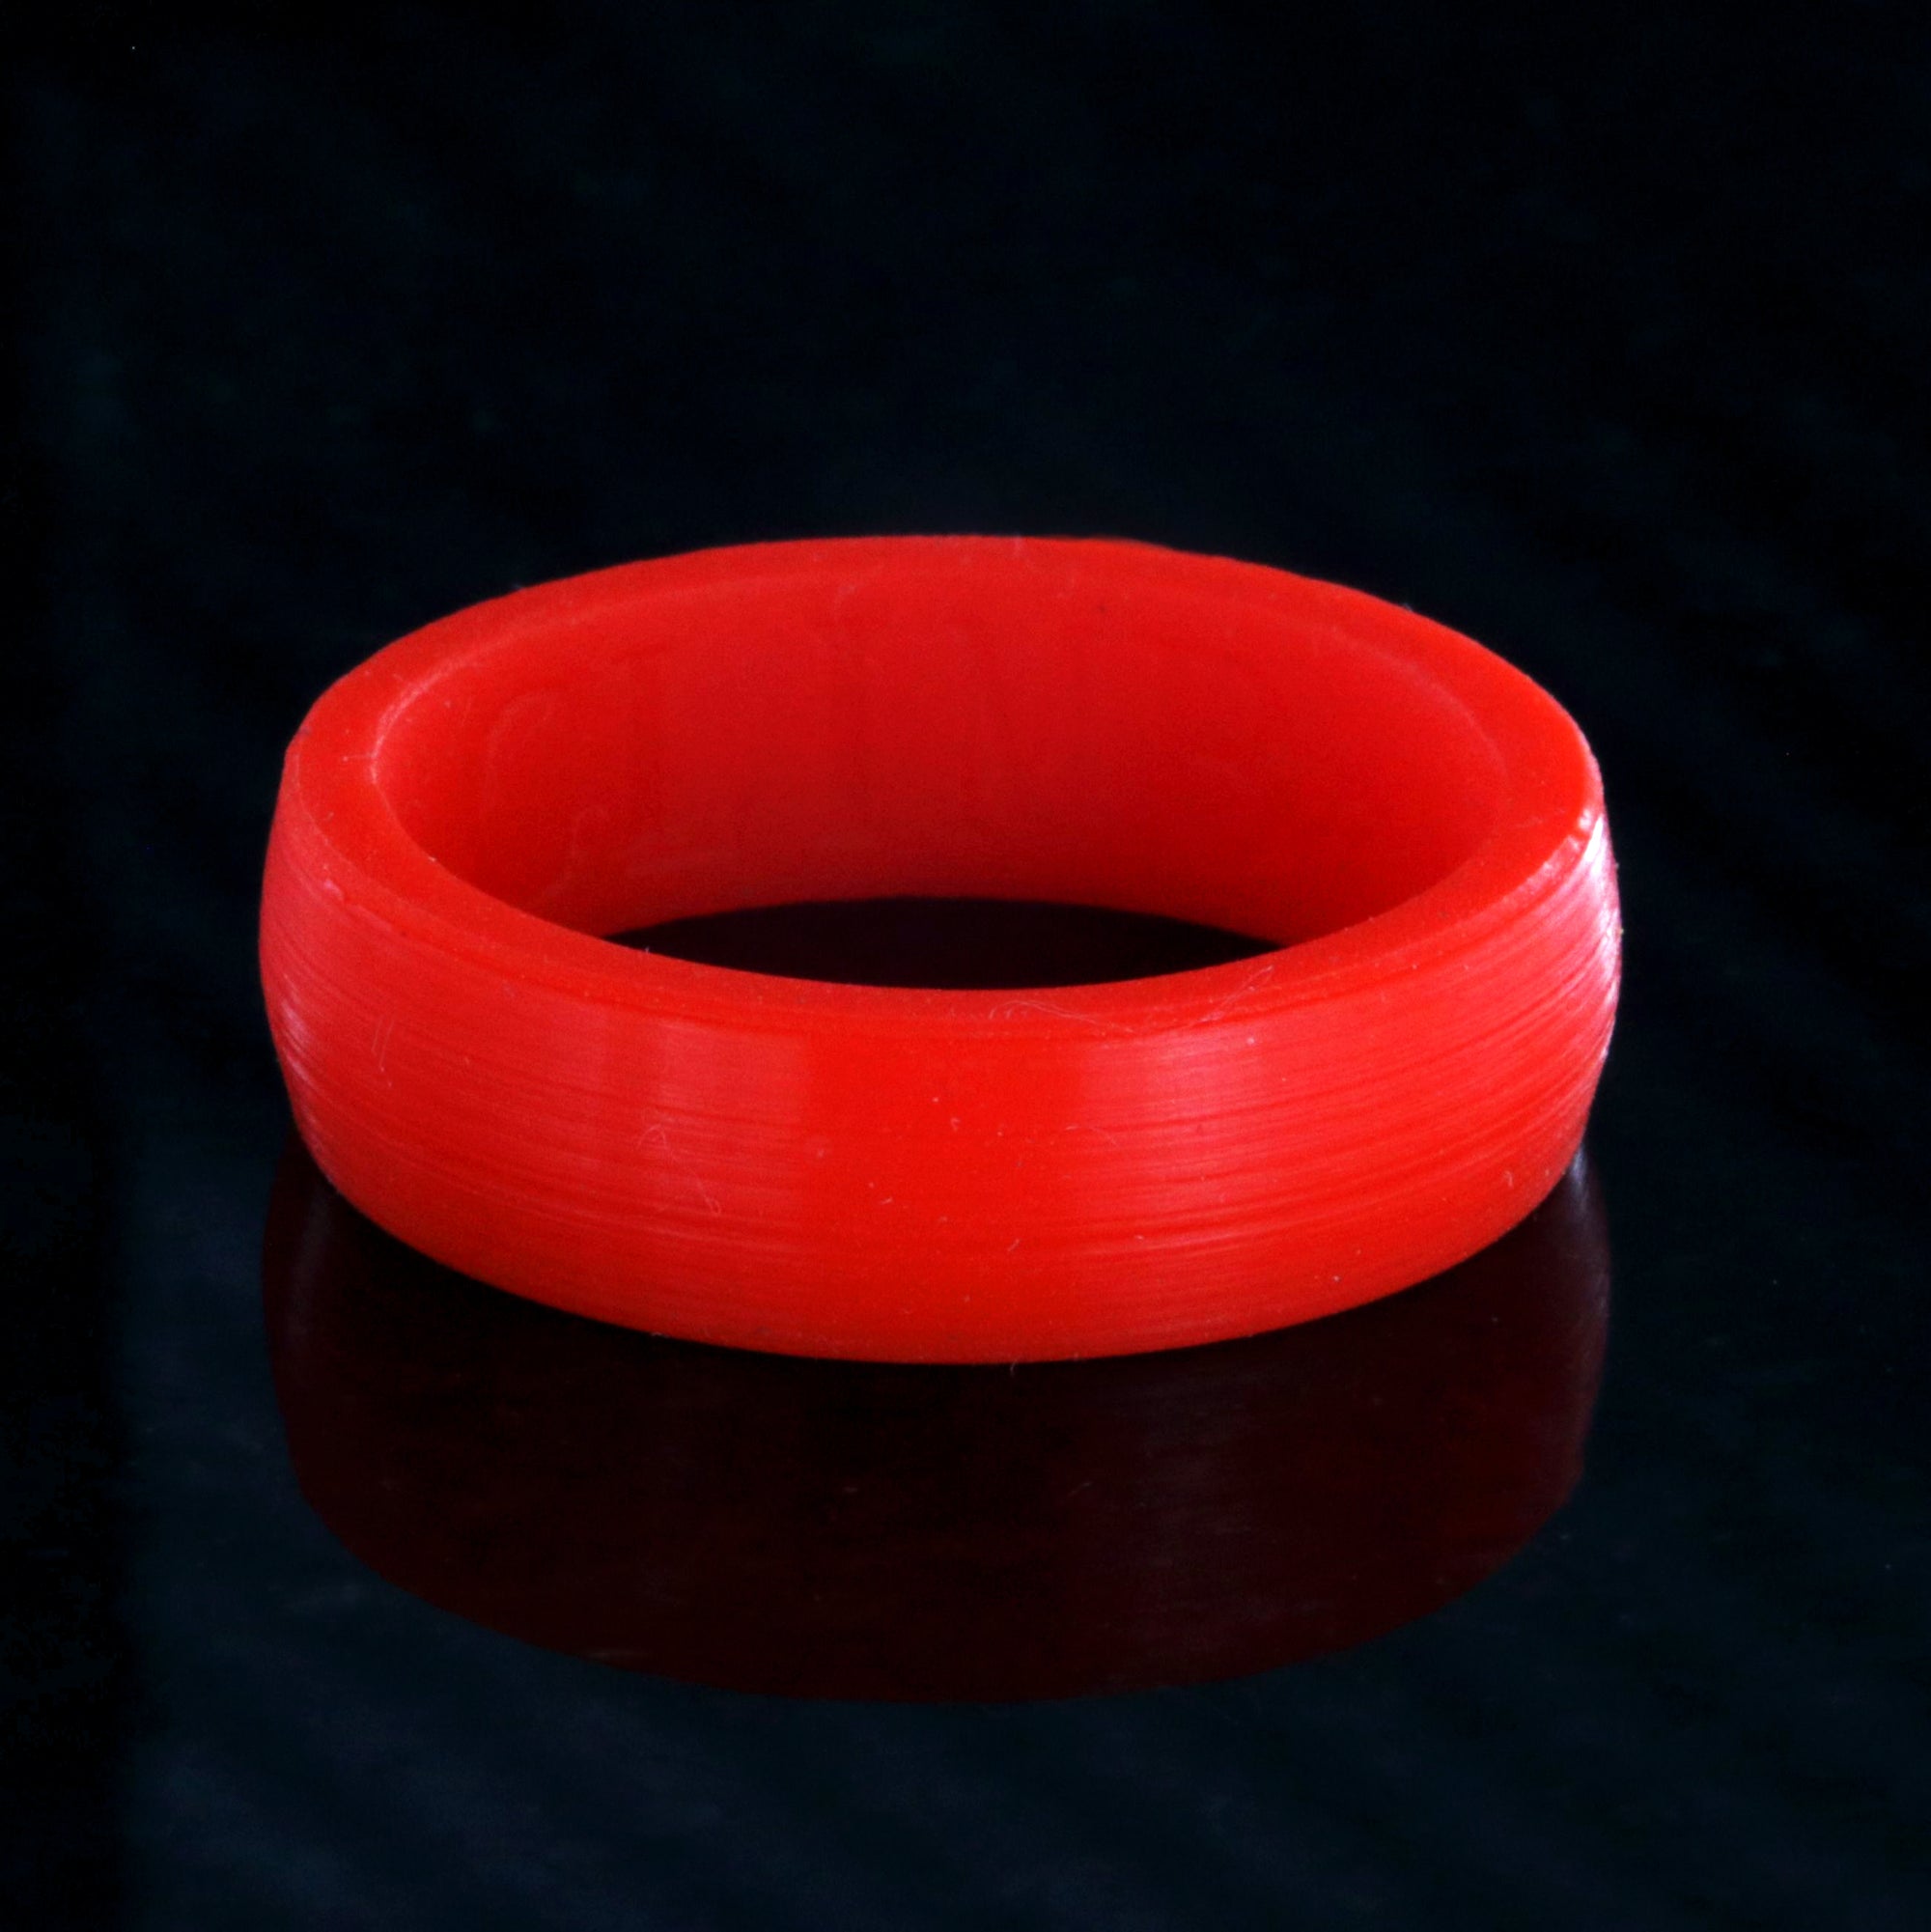 6mm wide red silicone CLIMB band